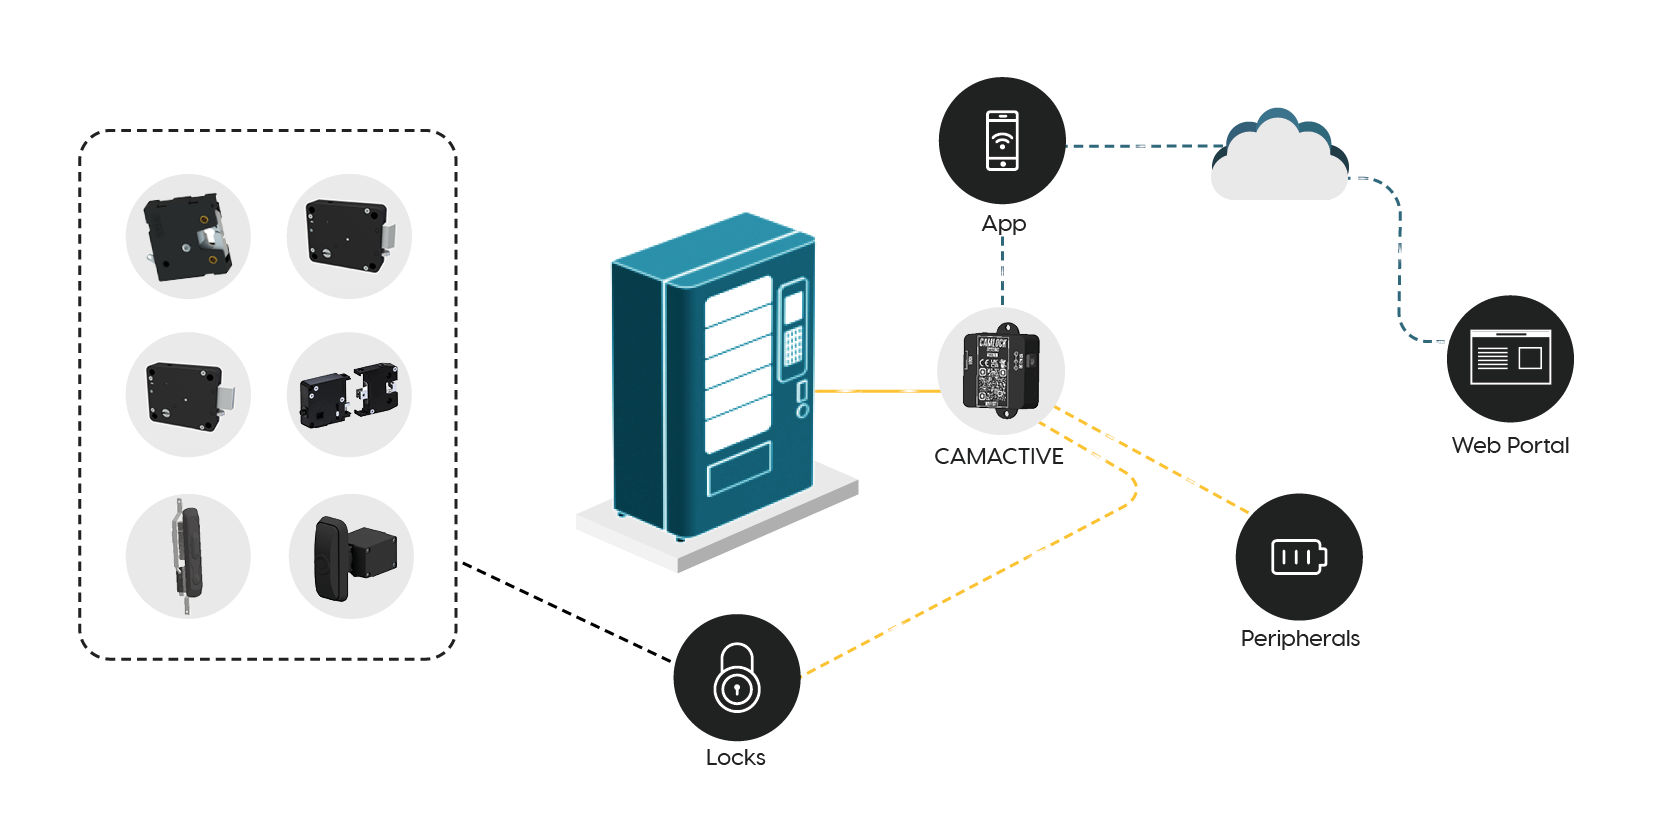 Camactive Access Control System Workflow